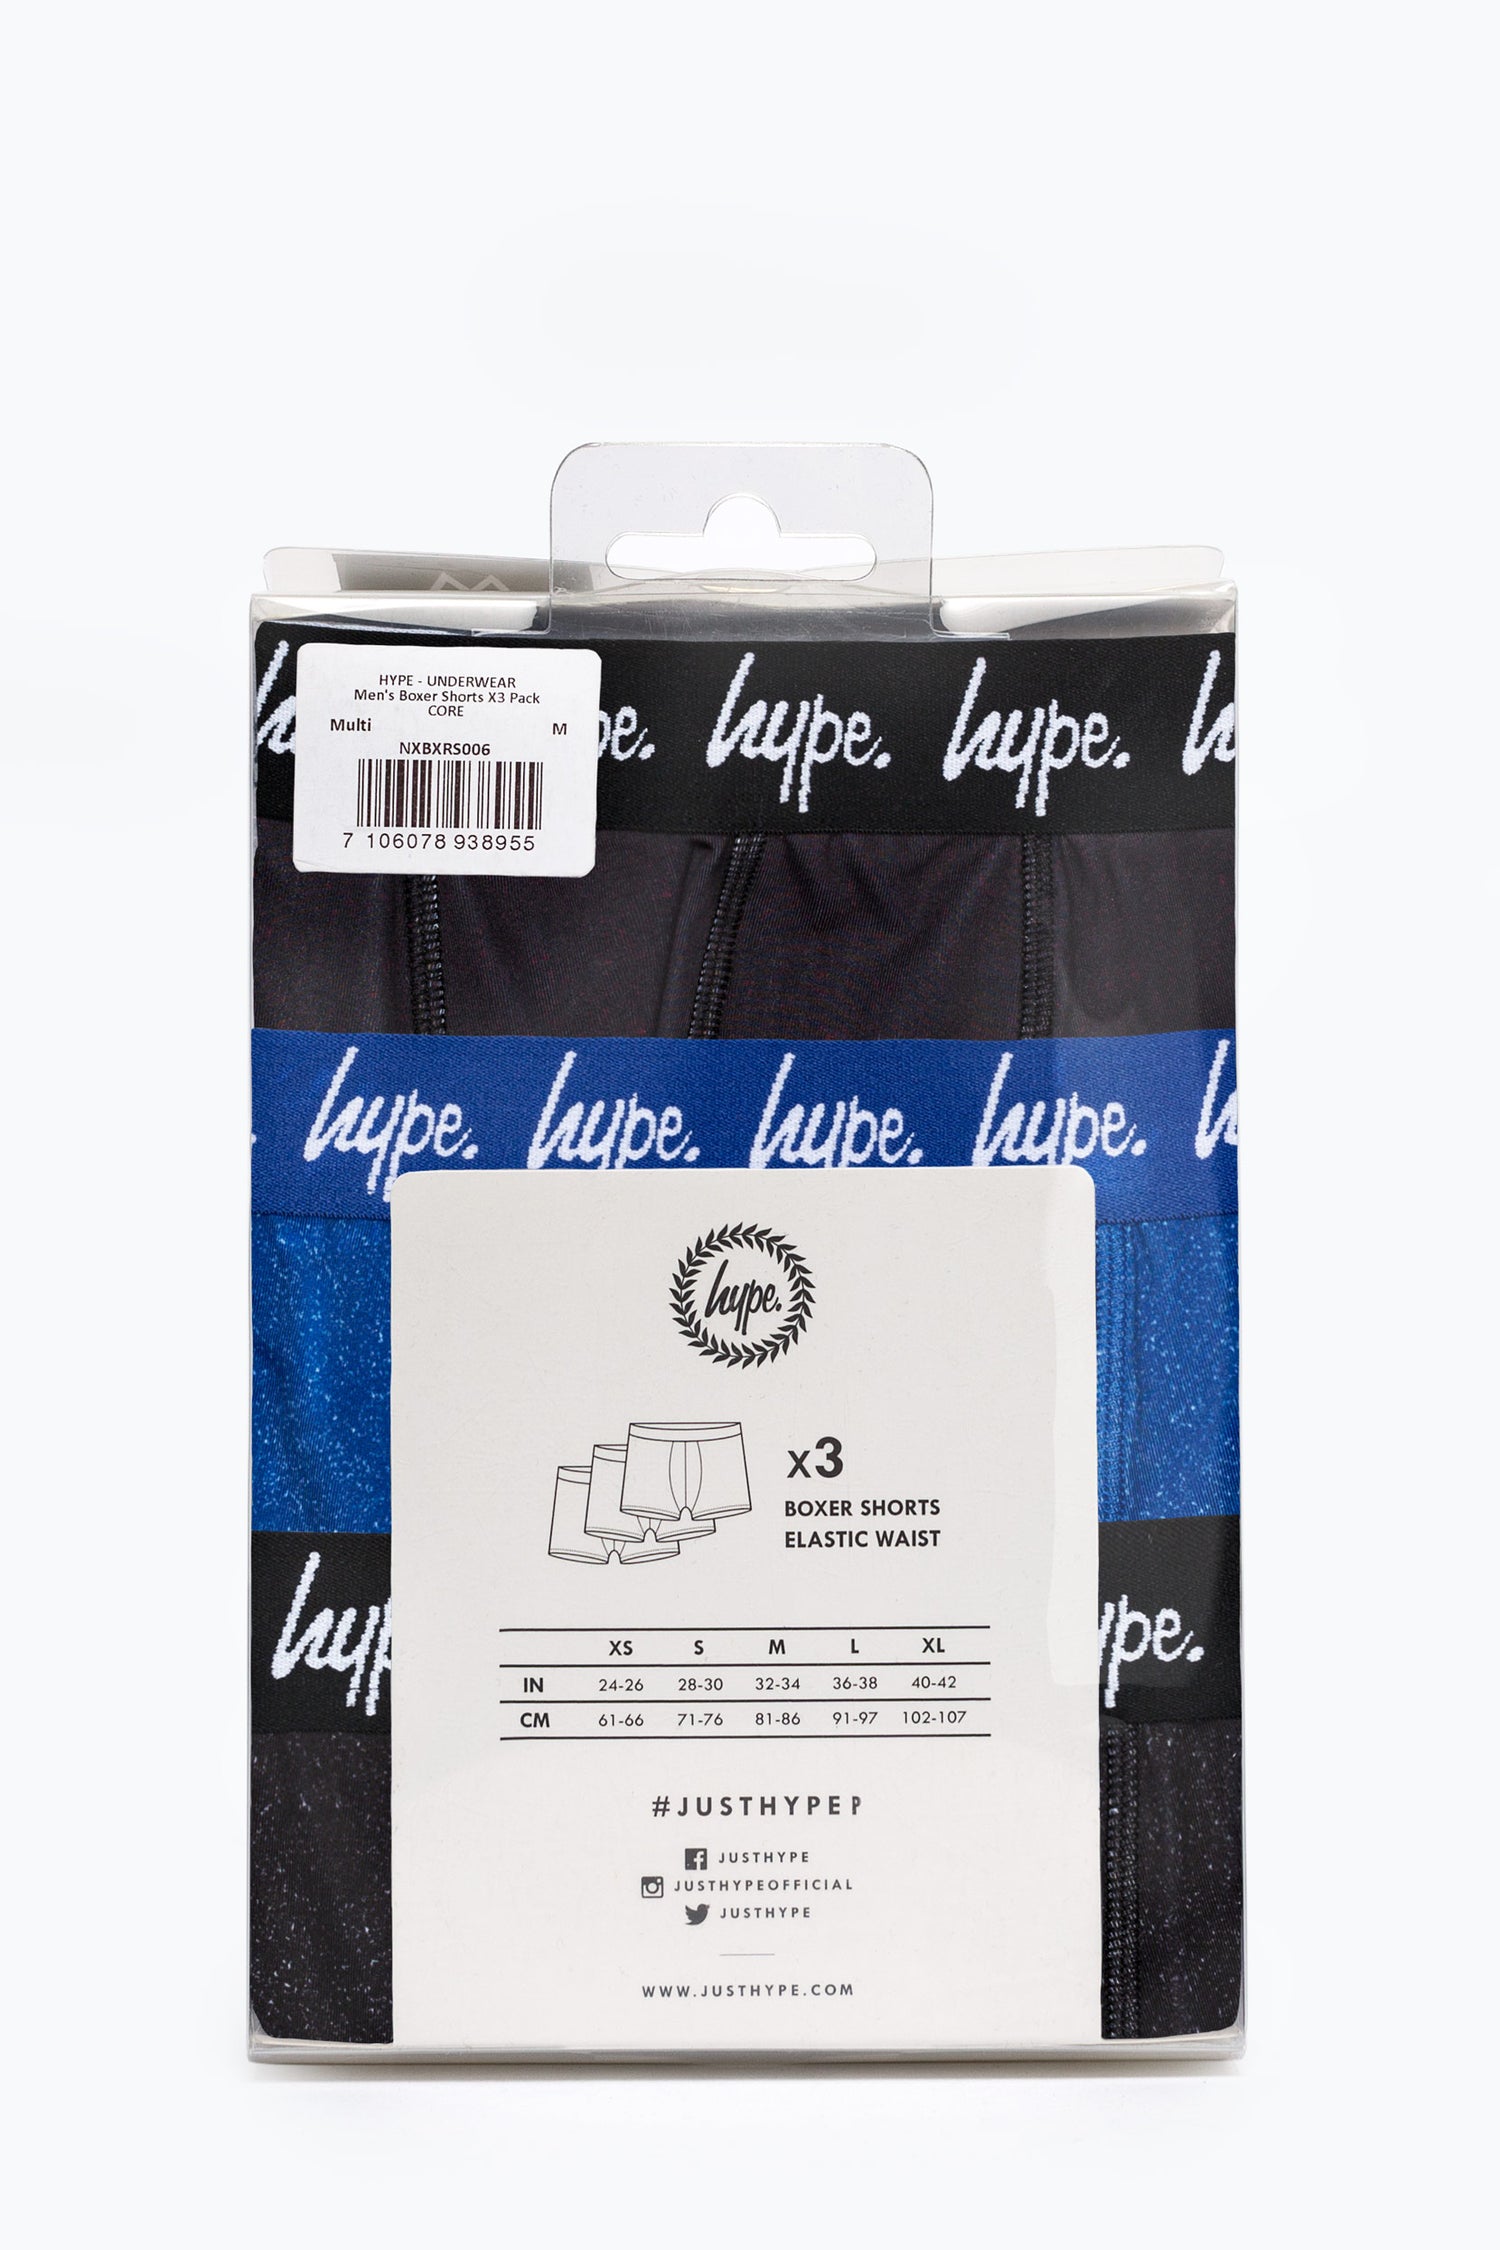 HYPE FADED SPECKLE MENS BOXER SHORTS X3 PACK